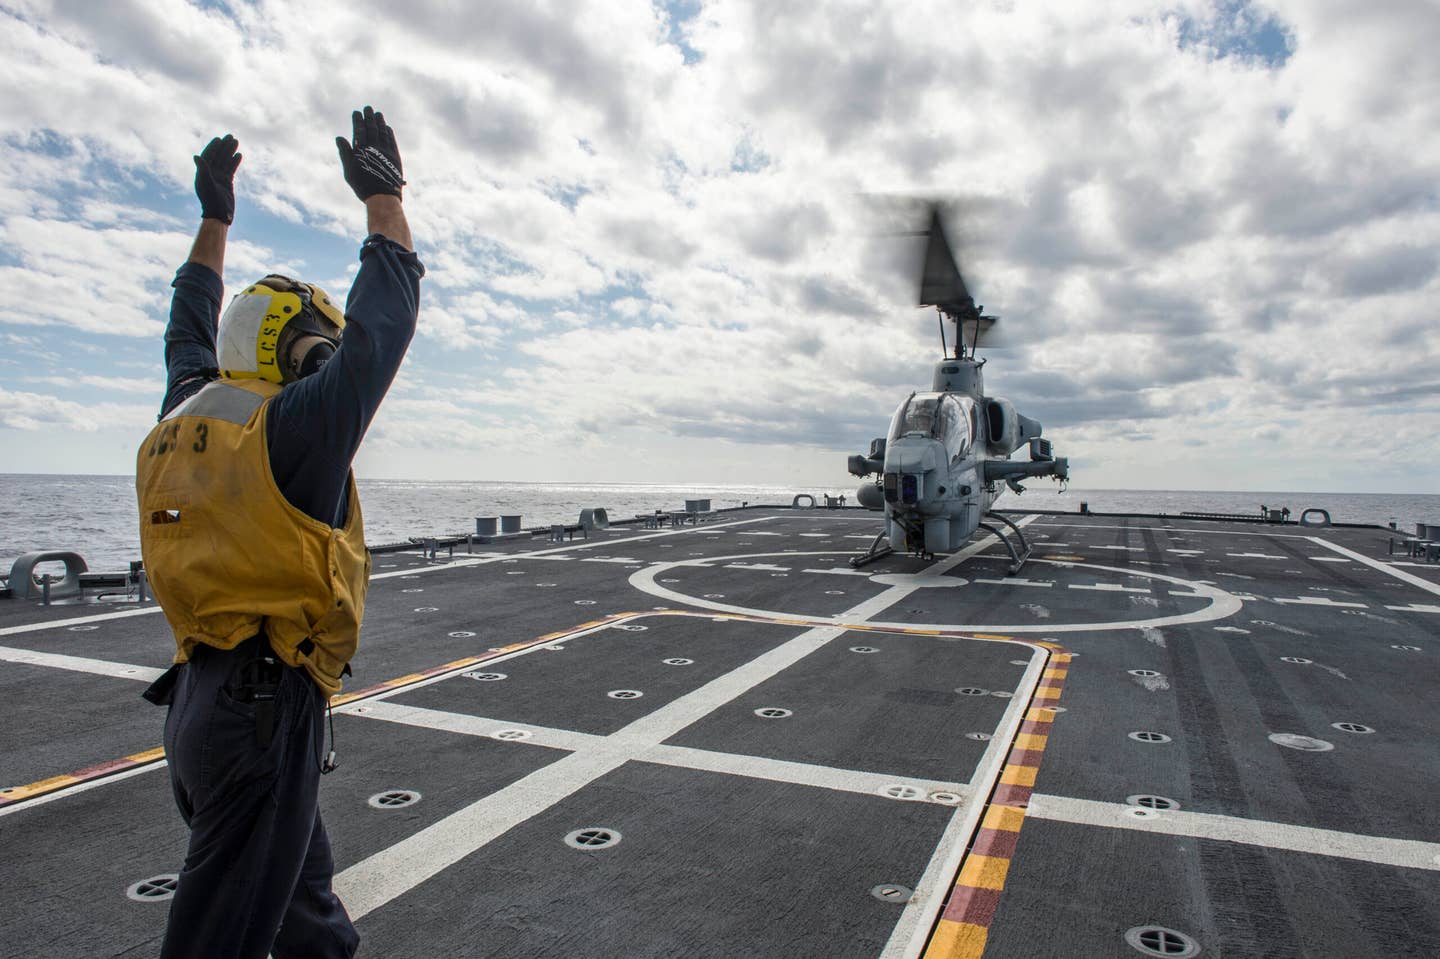 Boatswain's Mate 2nd Class Adam Garnett from Anchorage, Alaska, signals an AH-1 Cobra helicopter from Marine Air Group (MAG) 24 during deck landing qualification training aboard the littoral combat ship USS <em>Fort Worth</em> (LCS-3). (U.S. Navy photo by Mass Communication Specialist 2nd Class Antonio P. Turretto Ramos)